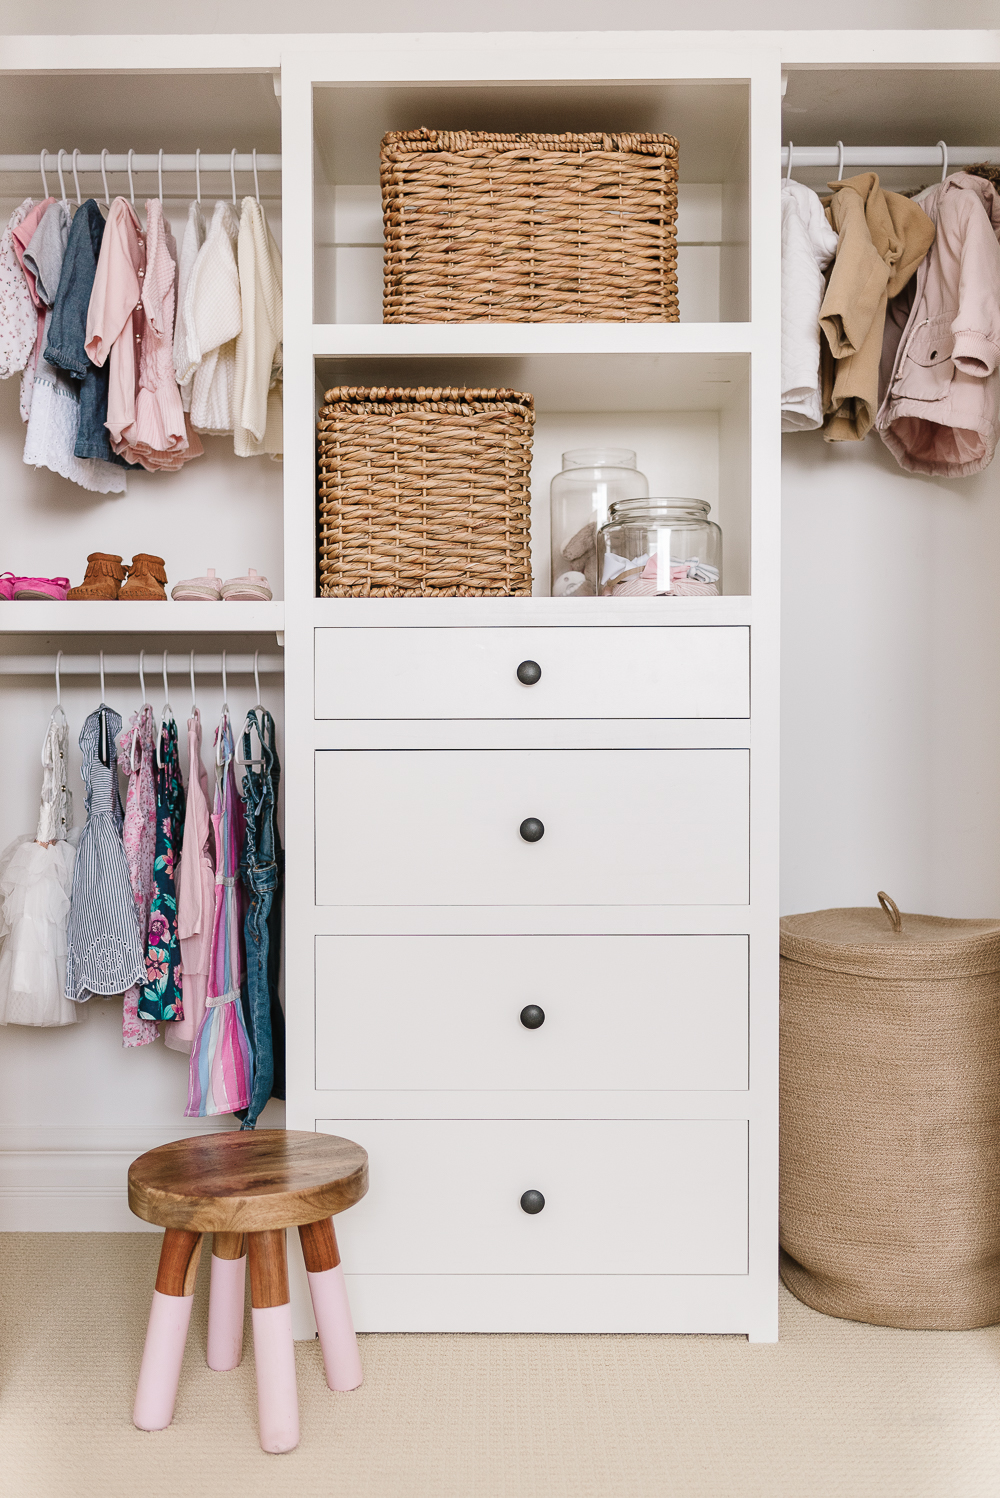 10 Tips on How To Organize Kids Closet / Tips for An Organized Kids'  Wardrobe / Our New Wardrobe 